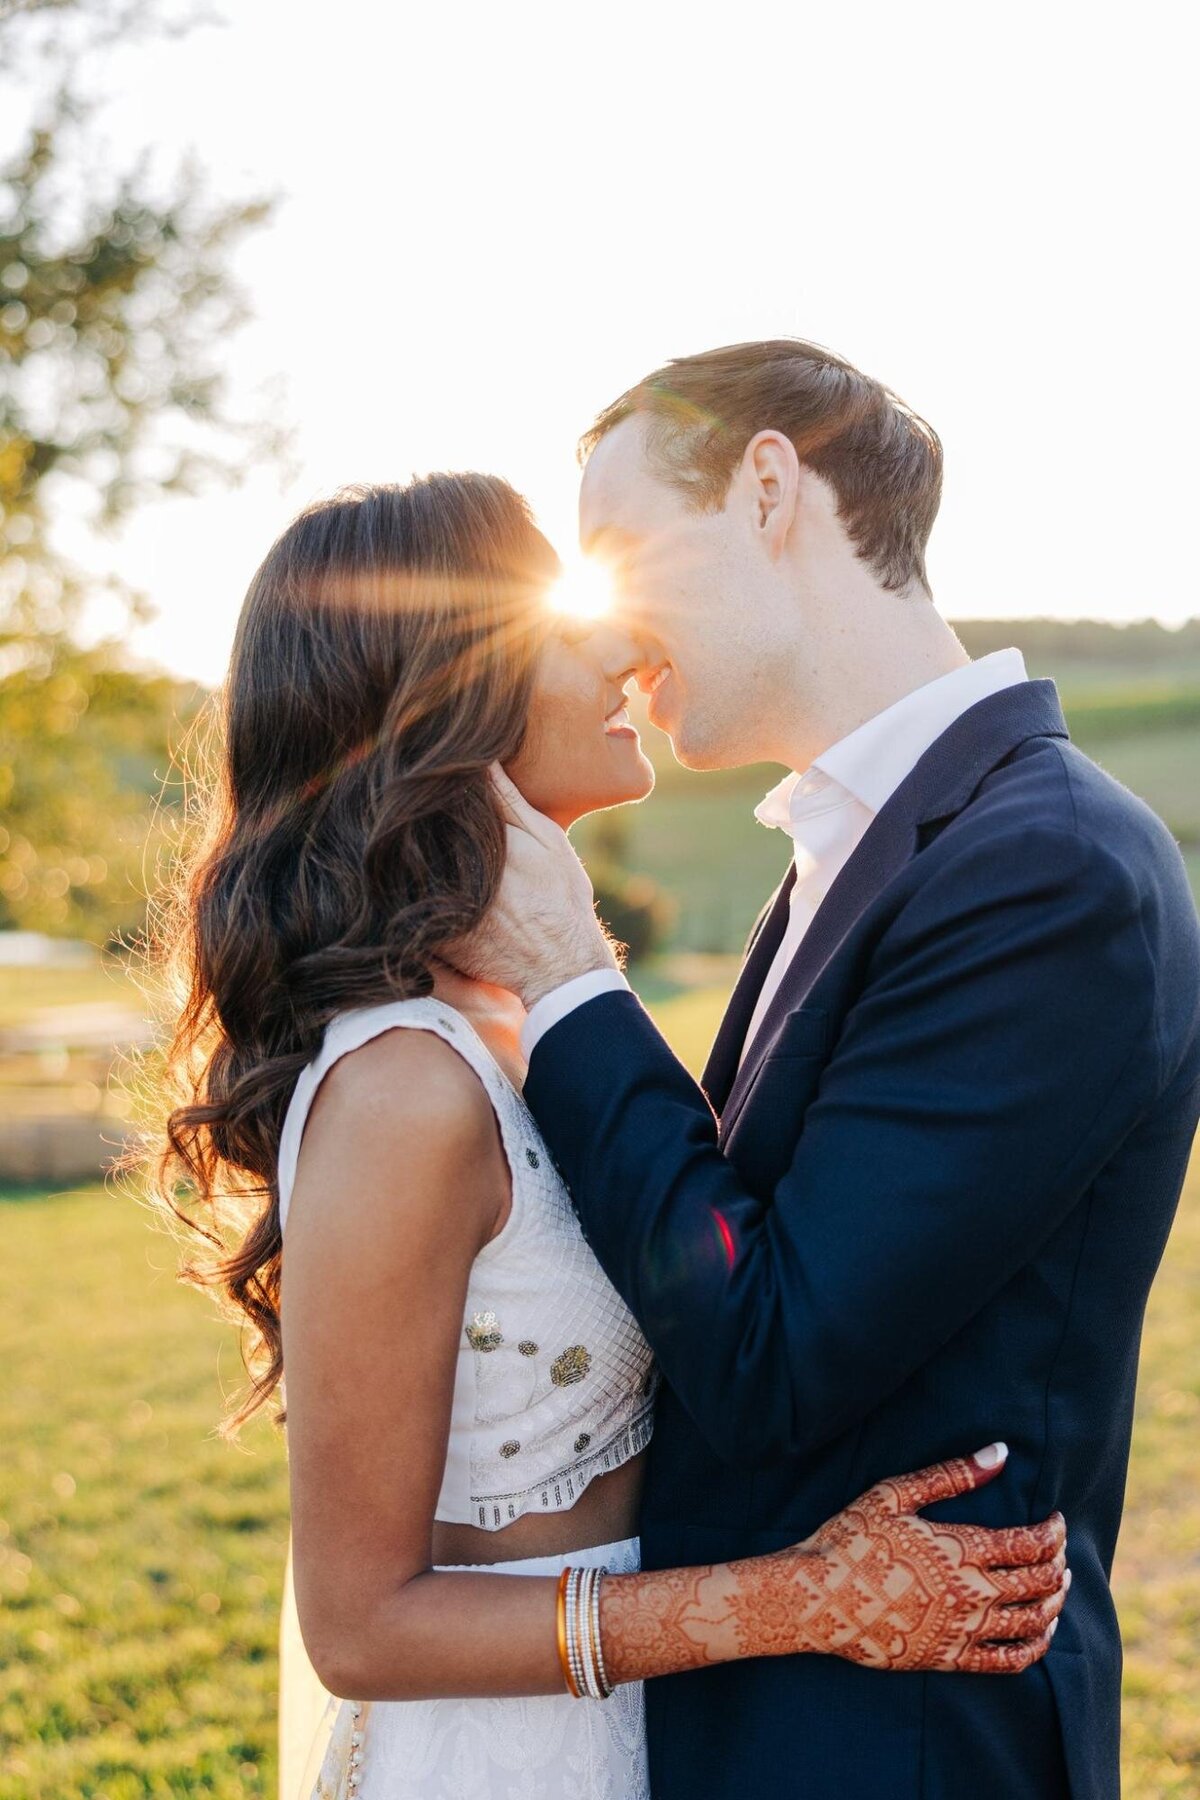 A couple in wedding attire embracing and touching foreheads lovingly in a sunlit field at sunset.